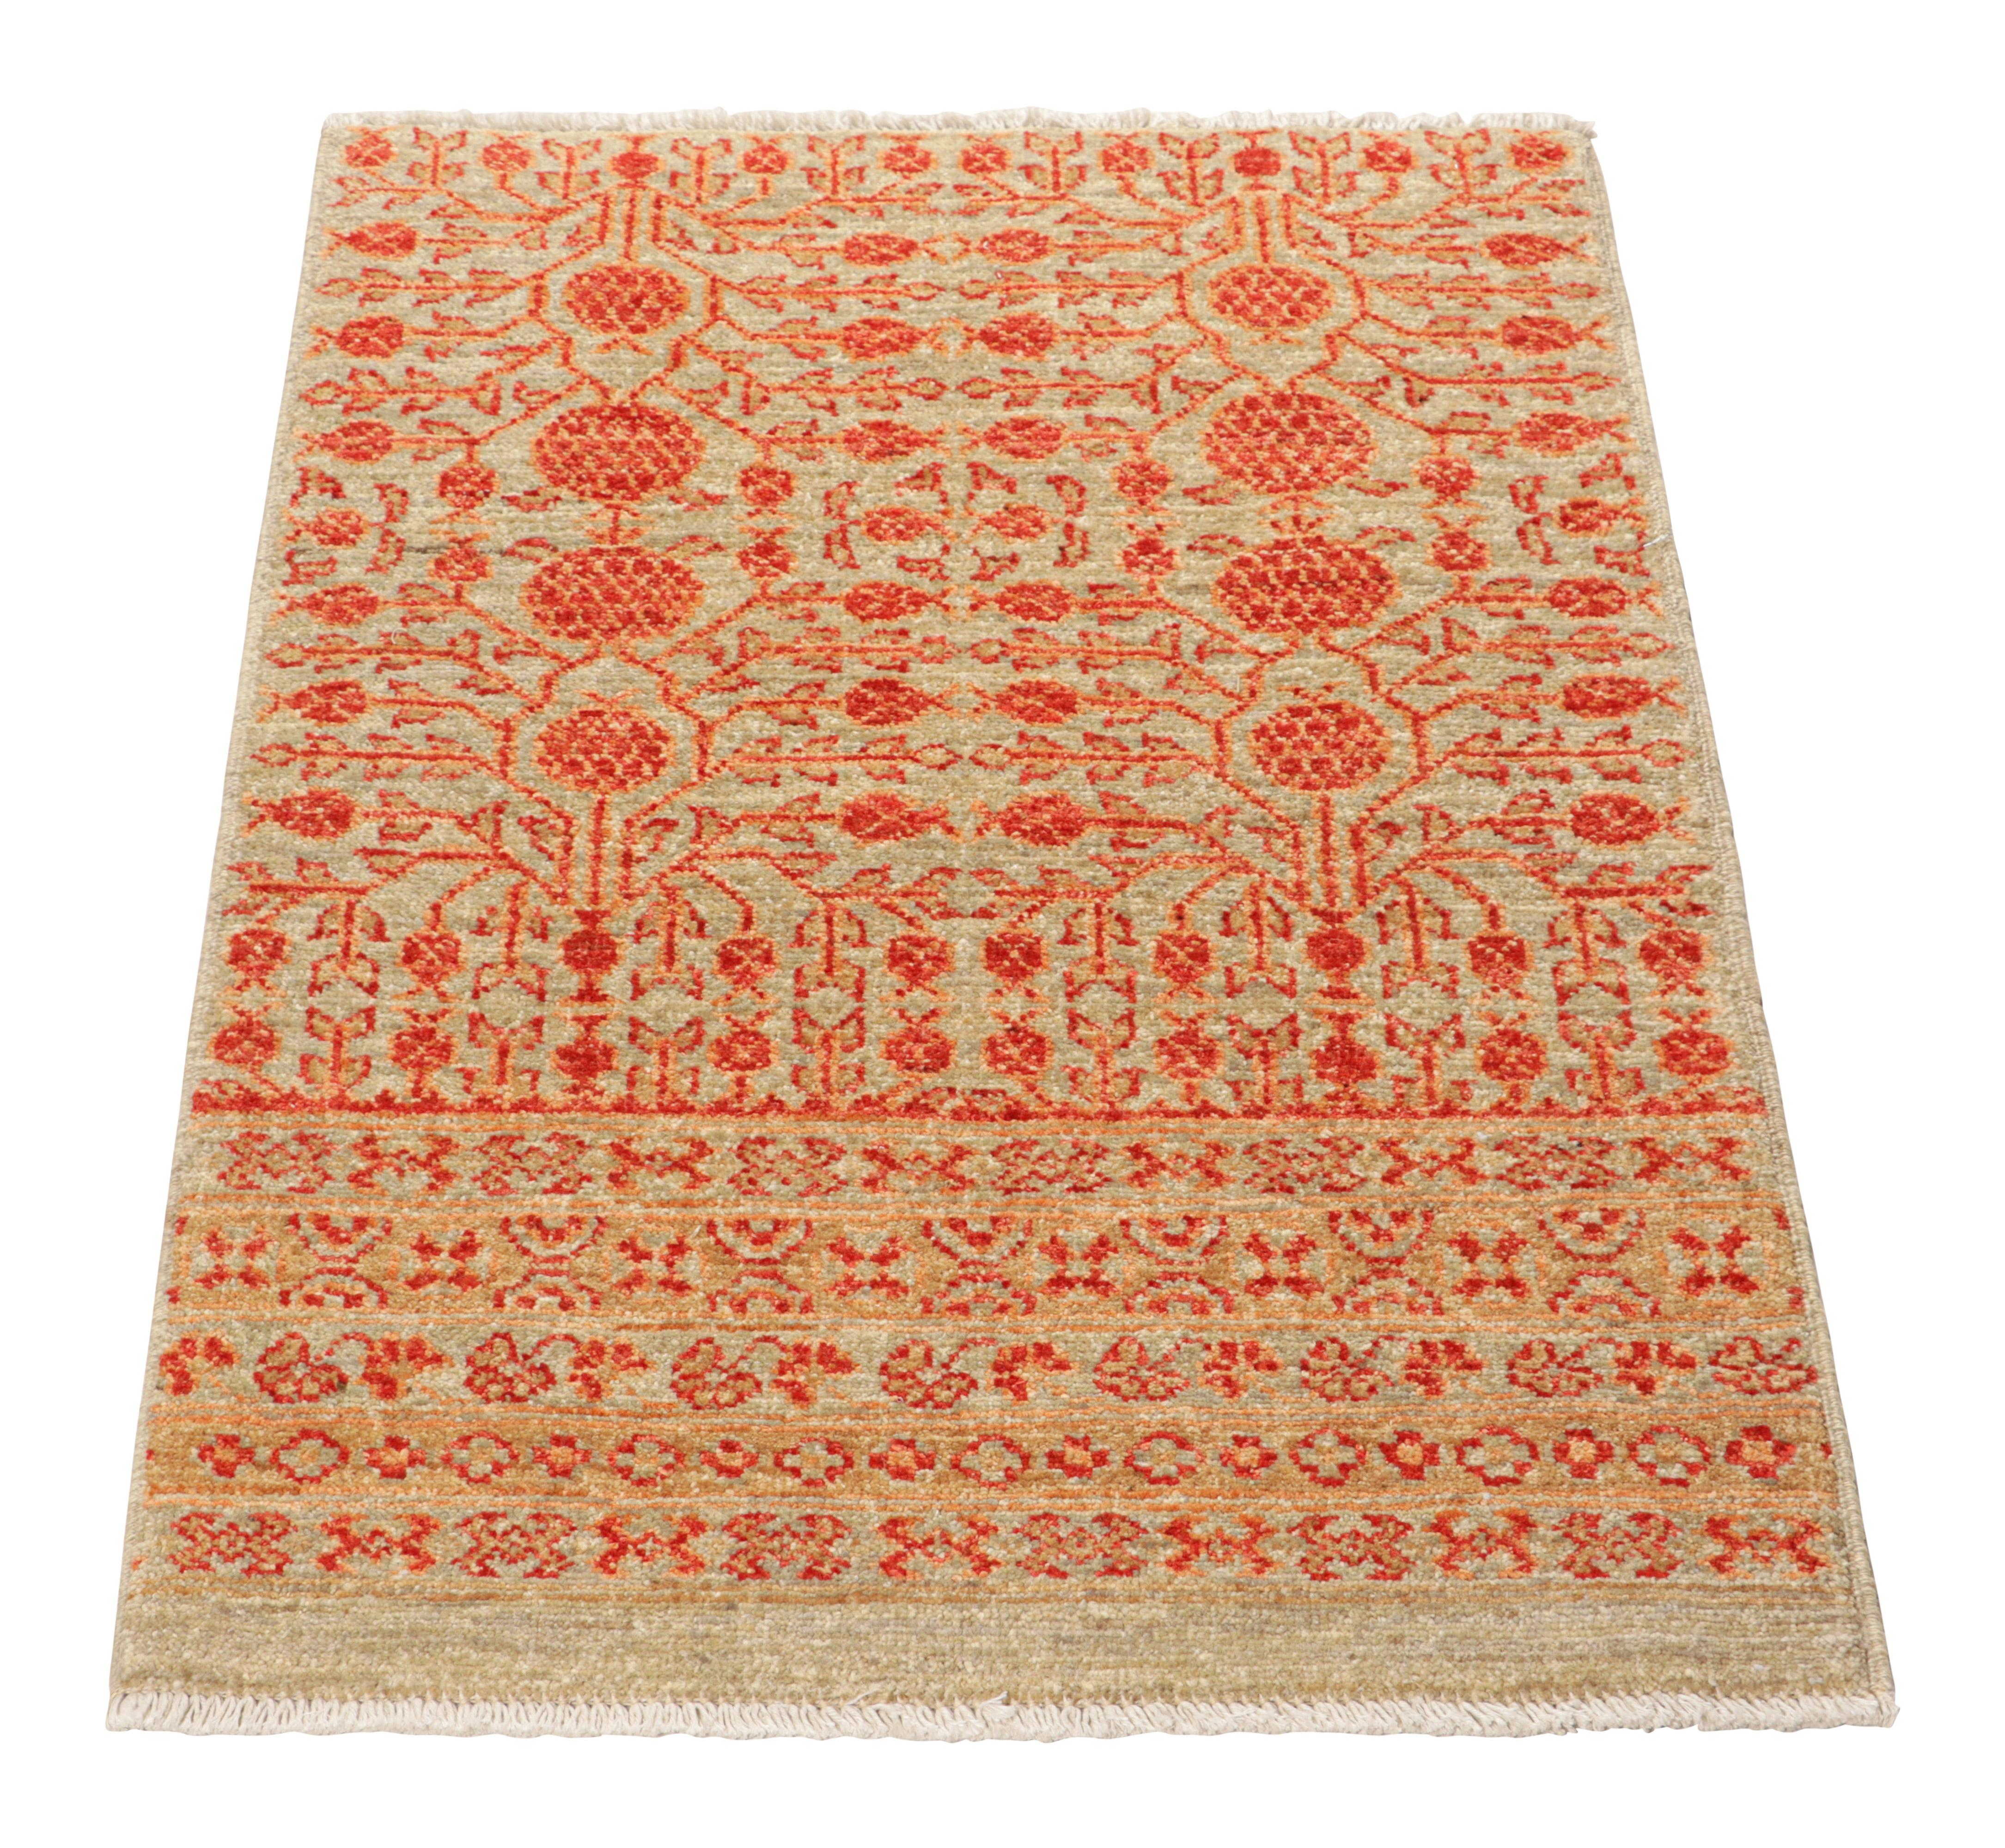 Hand-Knotted Rug & Kilim’s Khotan Style Rug in Beige-Brown with Pomegranate Patterns For Sale